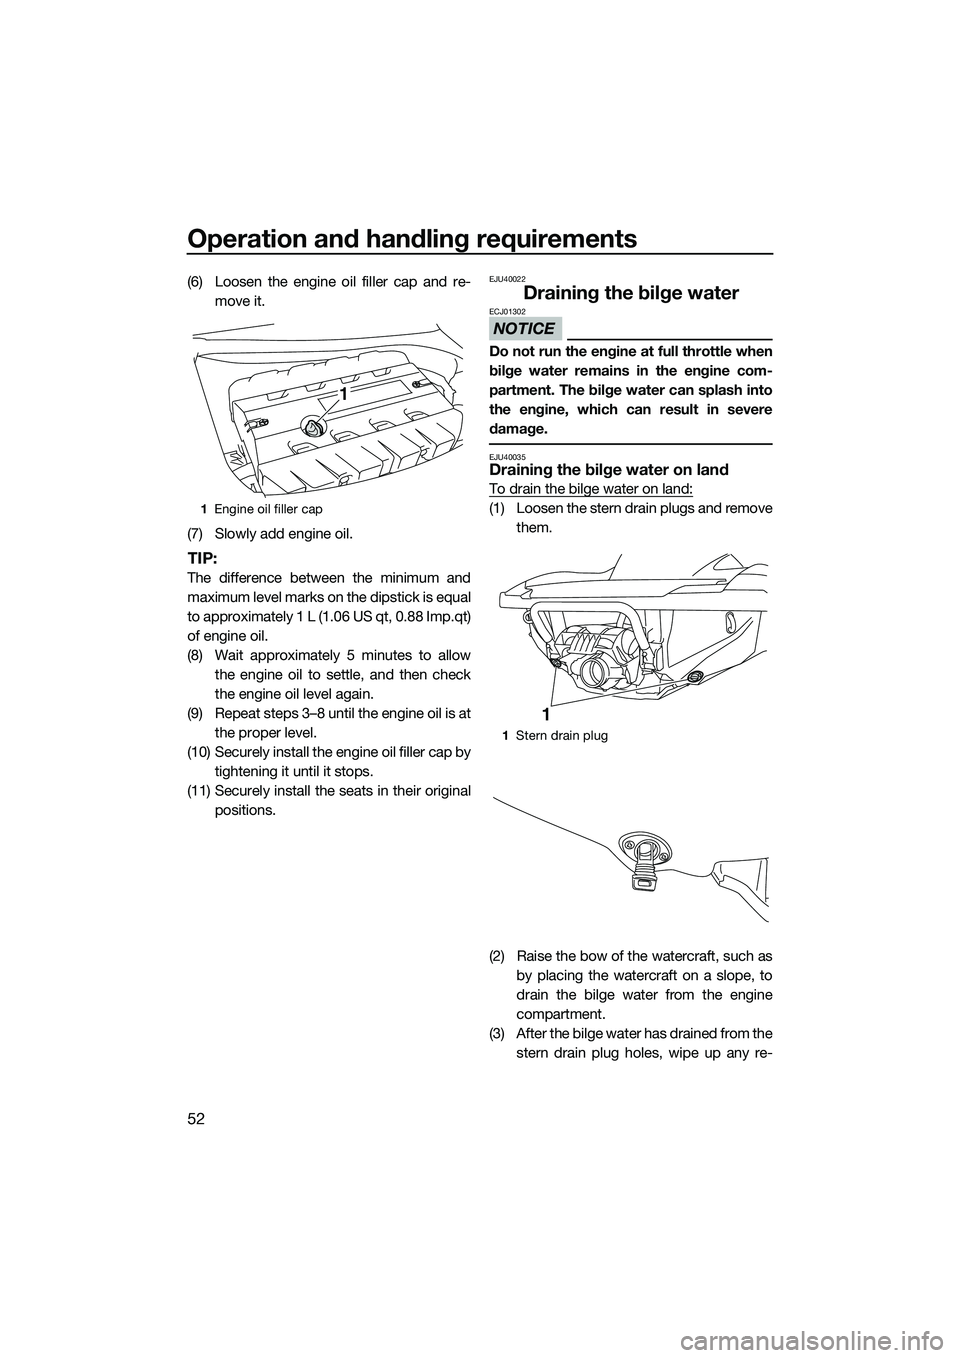 YAMAHA FZS SVHO 2014  Owners Manual Operation and handling requirements
52
(6) Loosen the engine oil filler cap and re-move it.
(7) Slowly add engine oil.
TIP:
The difference between the minimum and
maximum level marks on the dipstick i